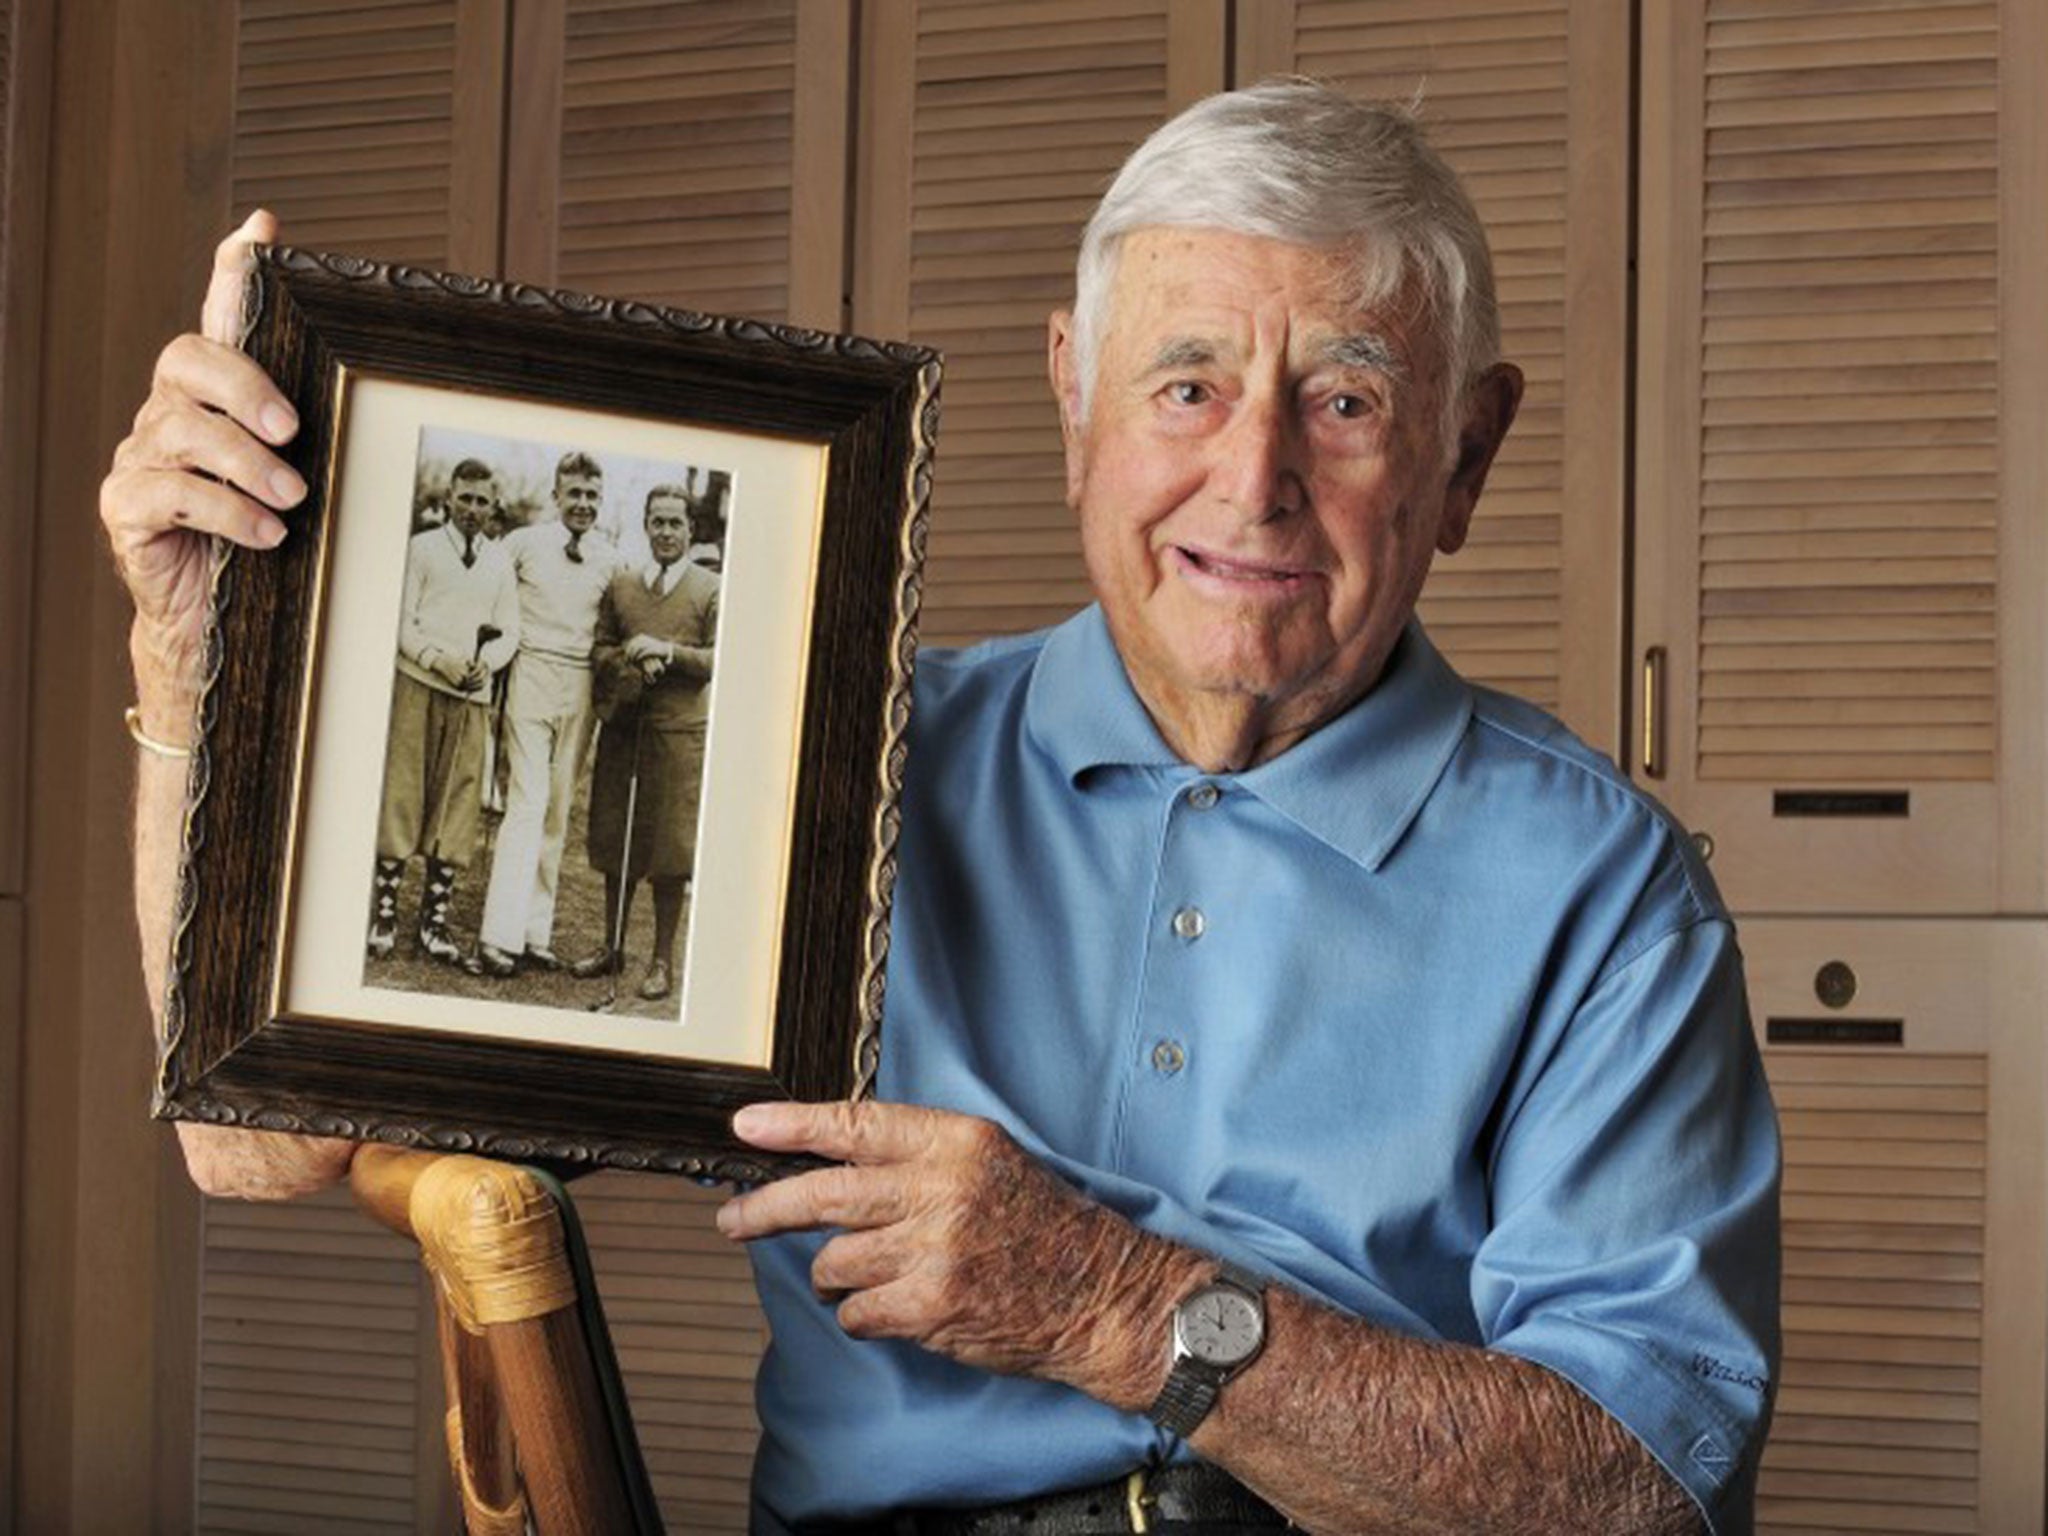 Portrait of Errie Ball at Willoughby GC. Ball holding photograph of (L-R) himself, Charlie Yates and Bob Jones.